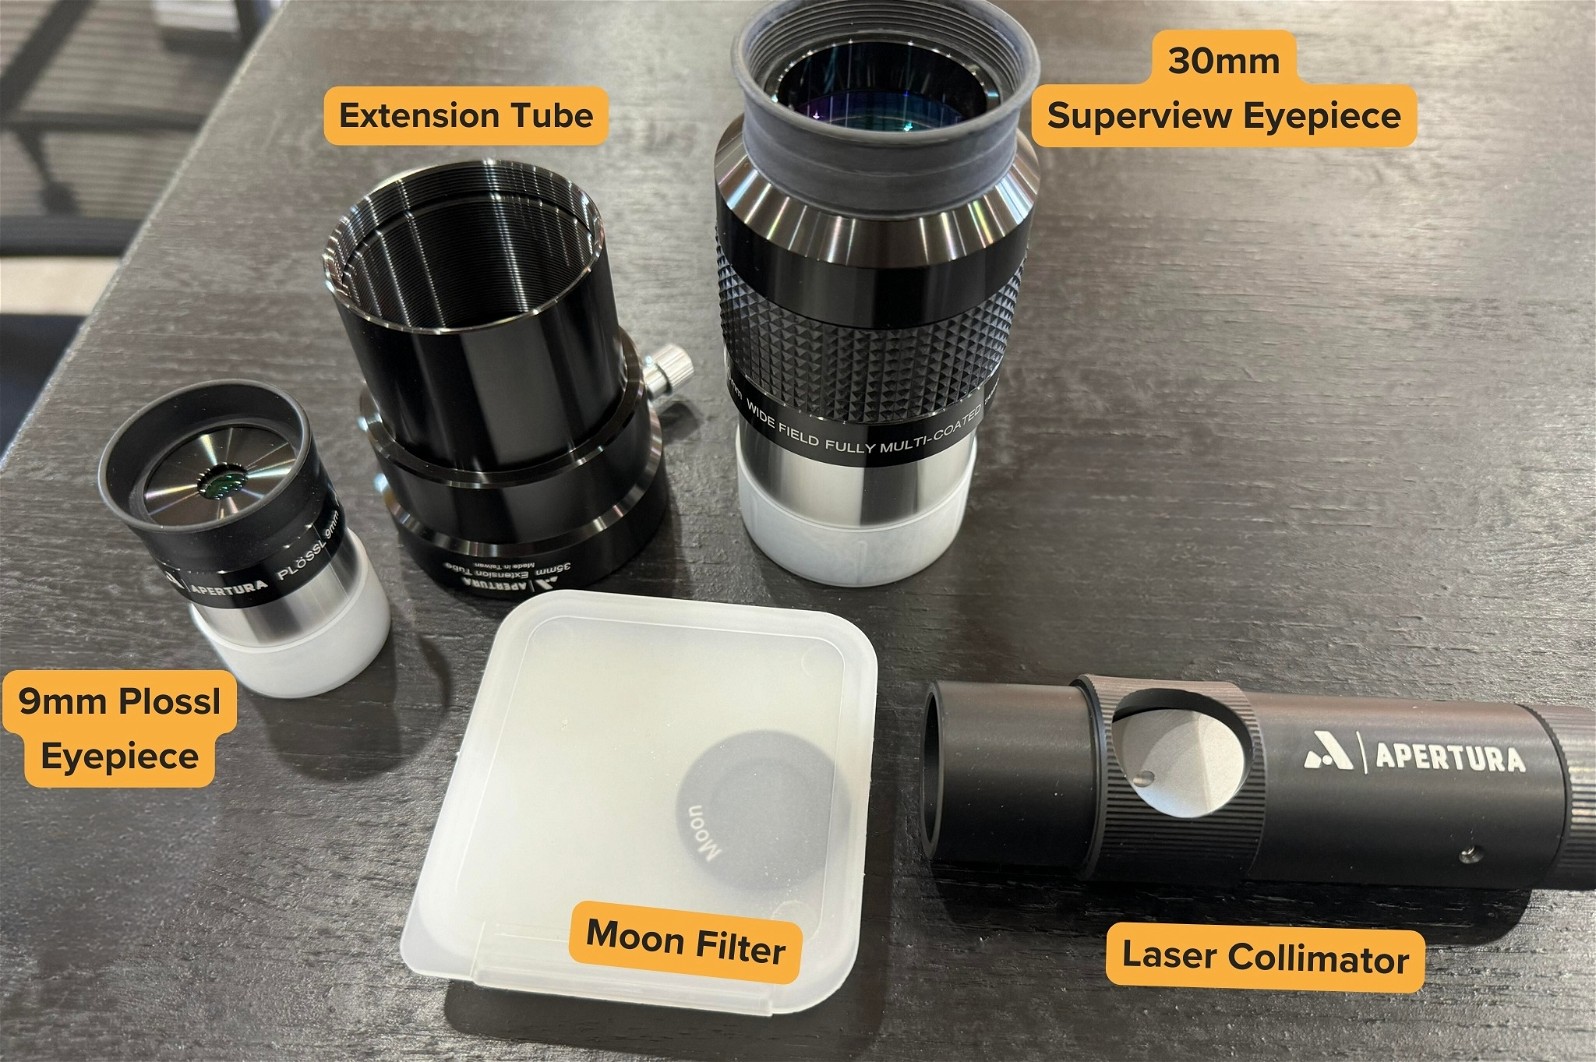 9mm Plossl, Extension Tube, 30mm Superview, Moon Filter and Laser Collimator. The accessories included with Apertura AD10.